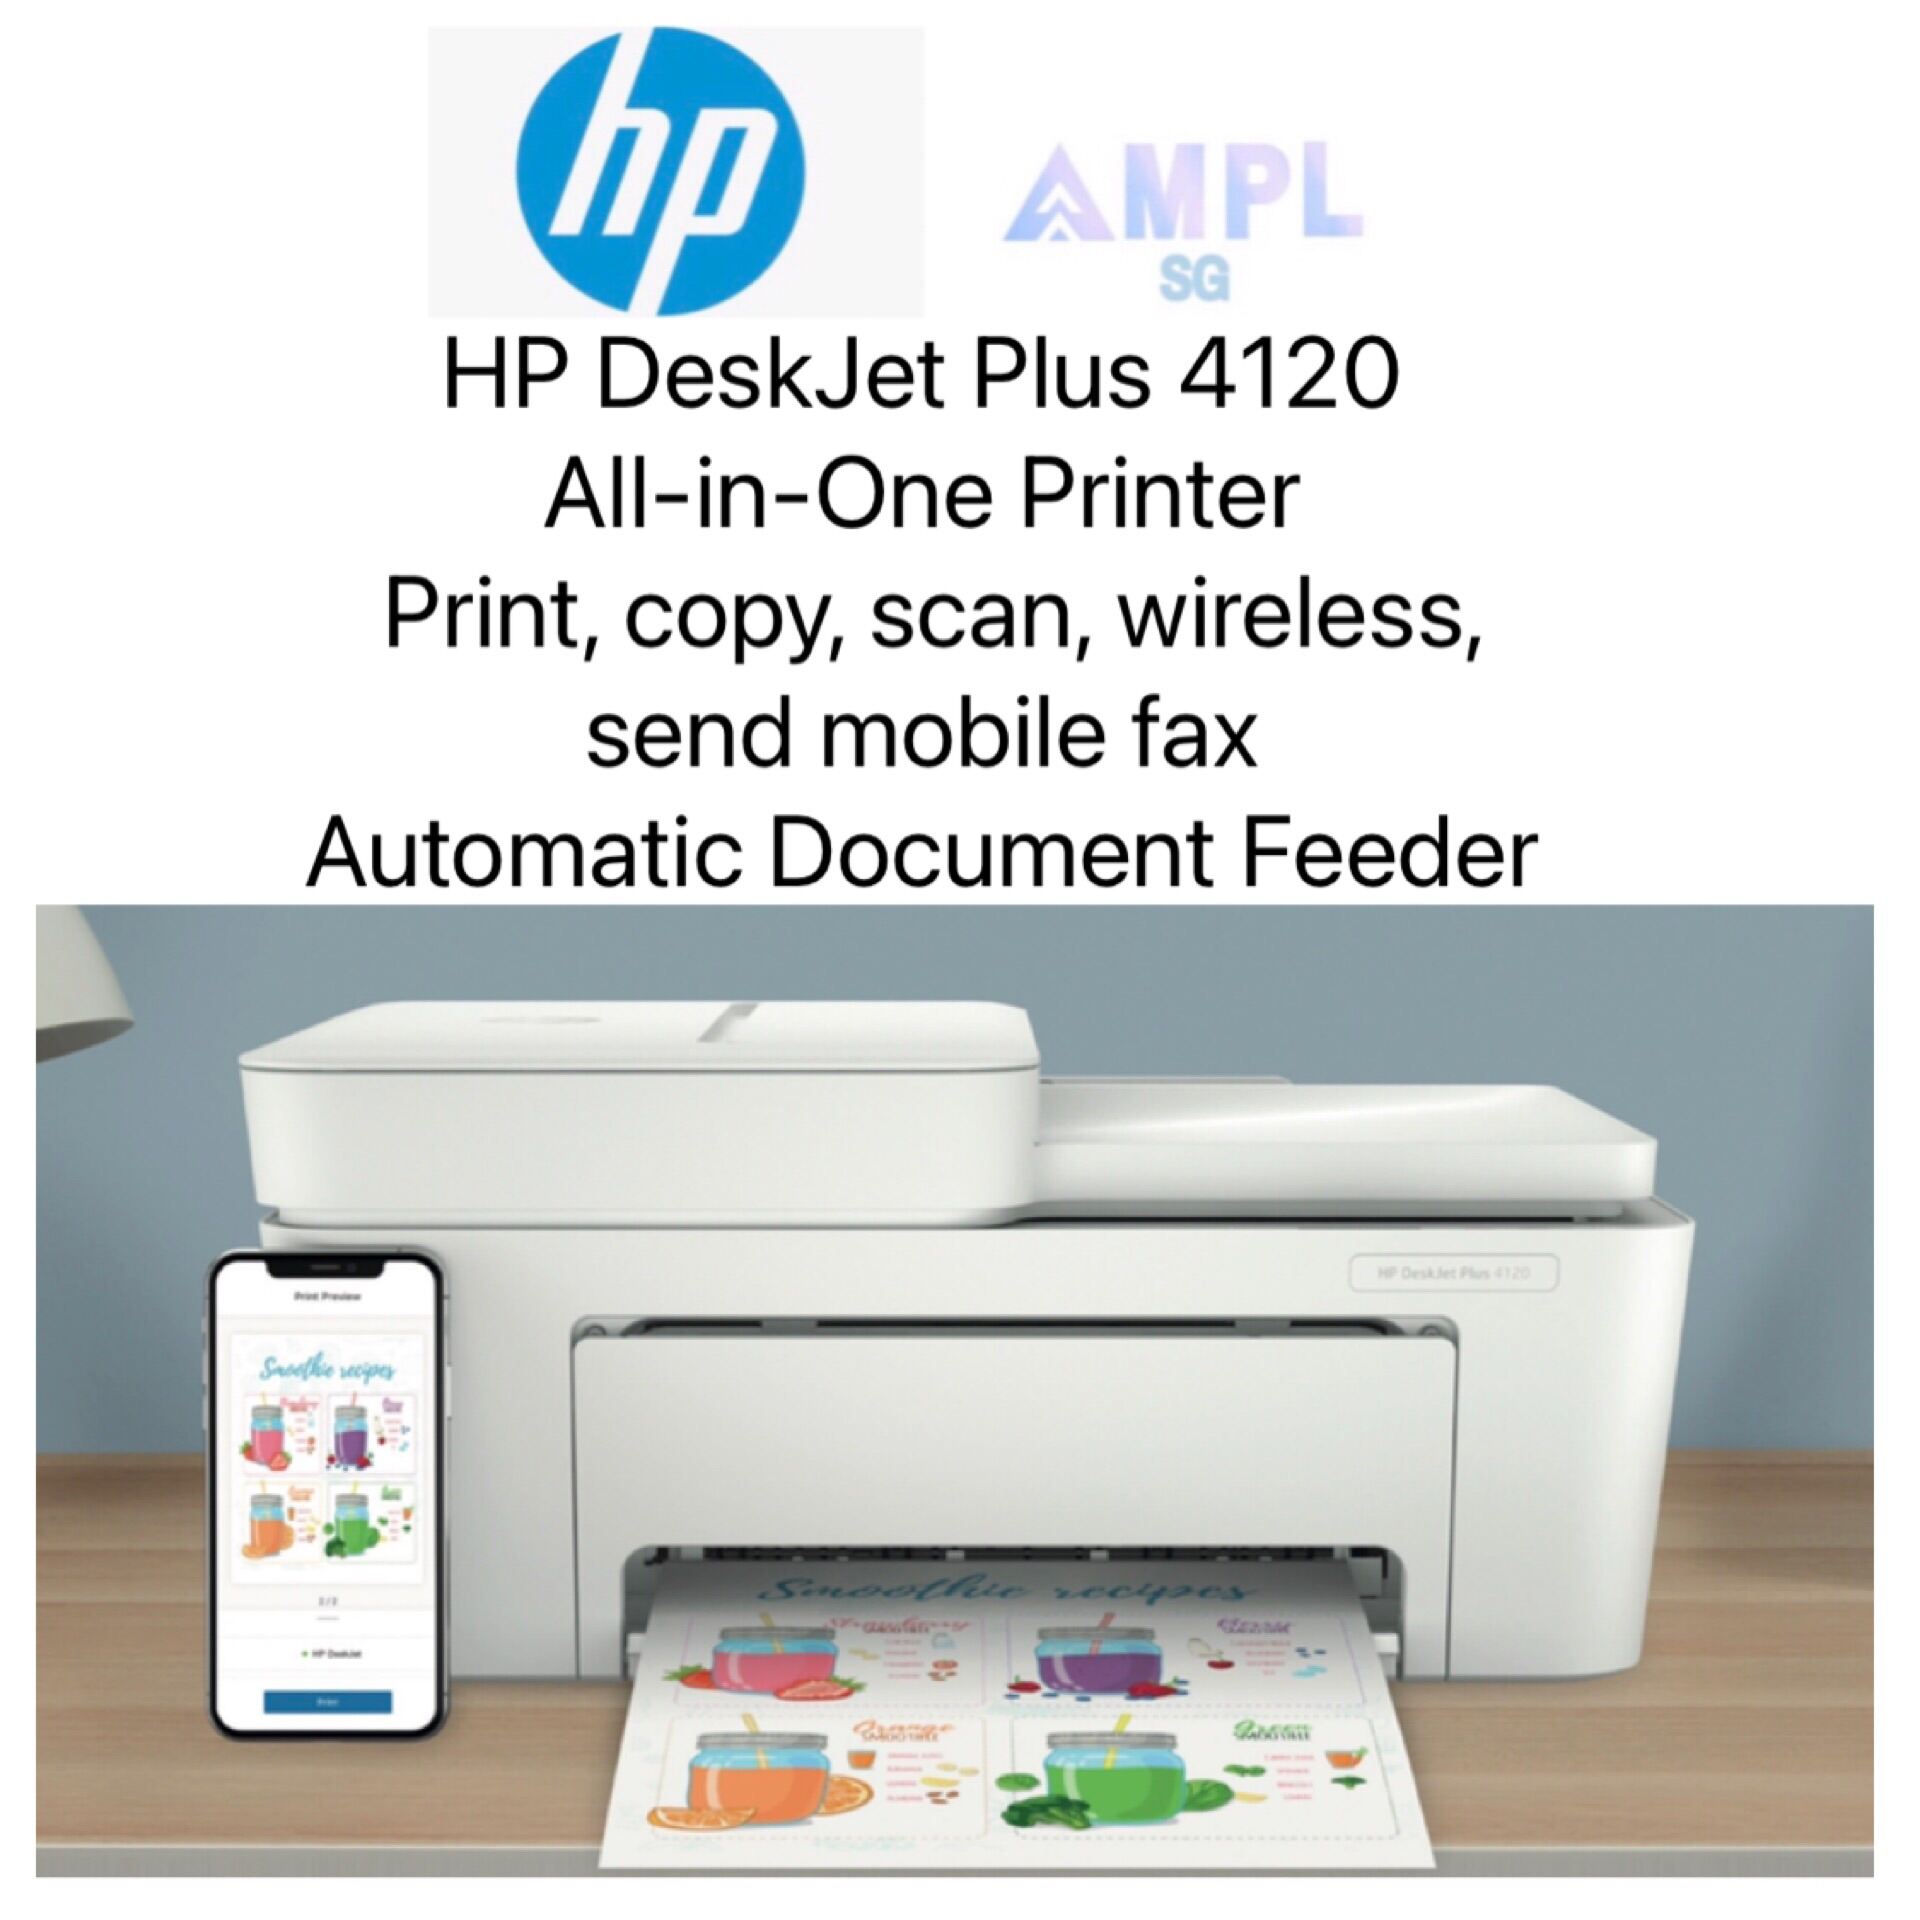 HP 4120 DeskJet Plus Color Printer - Print,Copy,Scan,Wireless,ADF, Send mobile fax *Orderable Supplies HP 67, 67xl, 67xxl* • 1 year onsite exchange warranty by HP Singapore Direct * Singapore